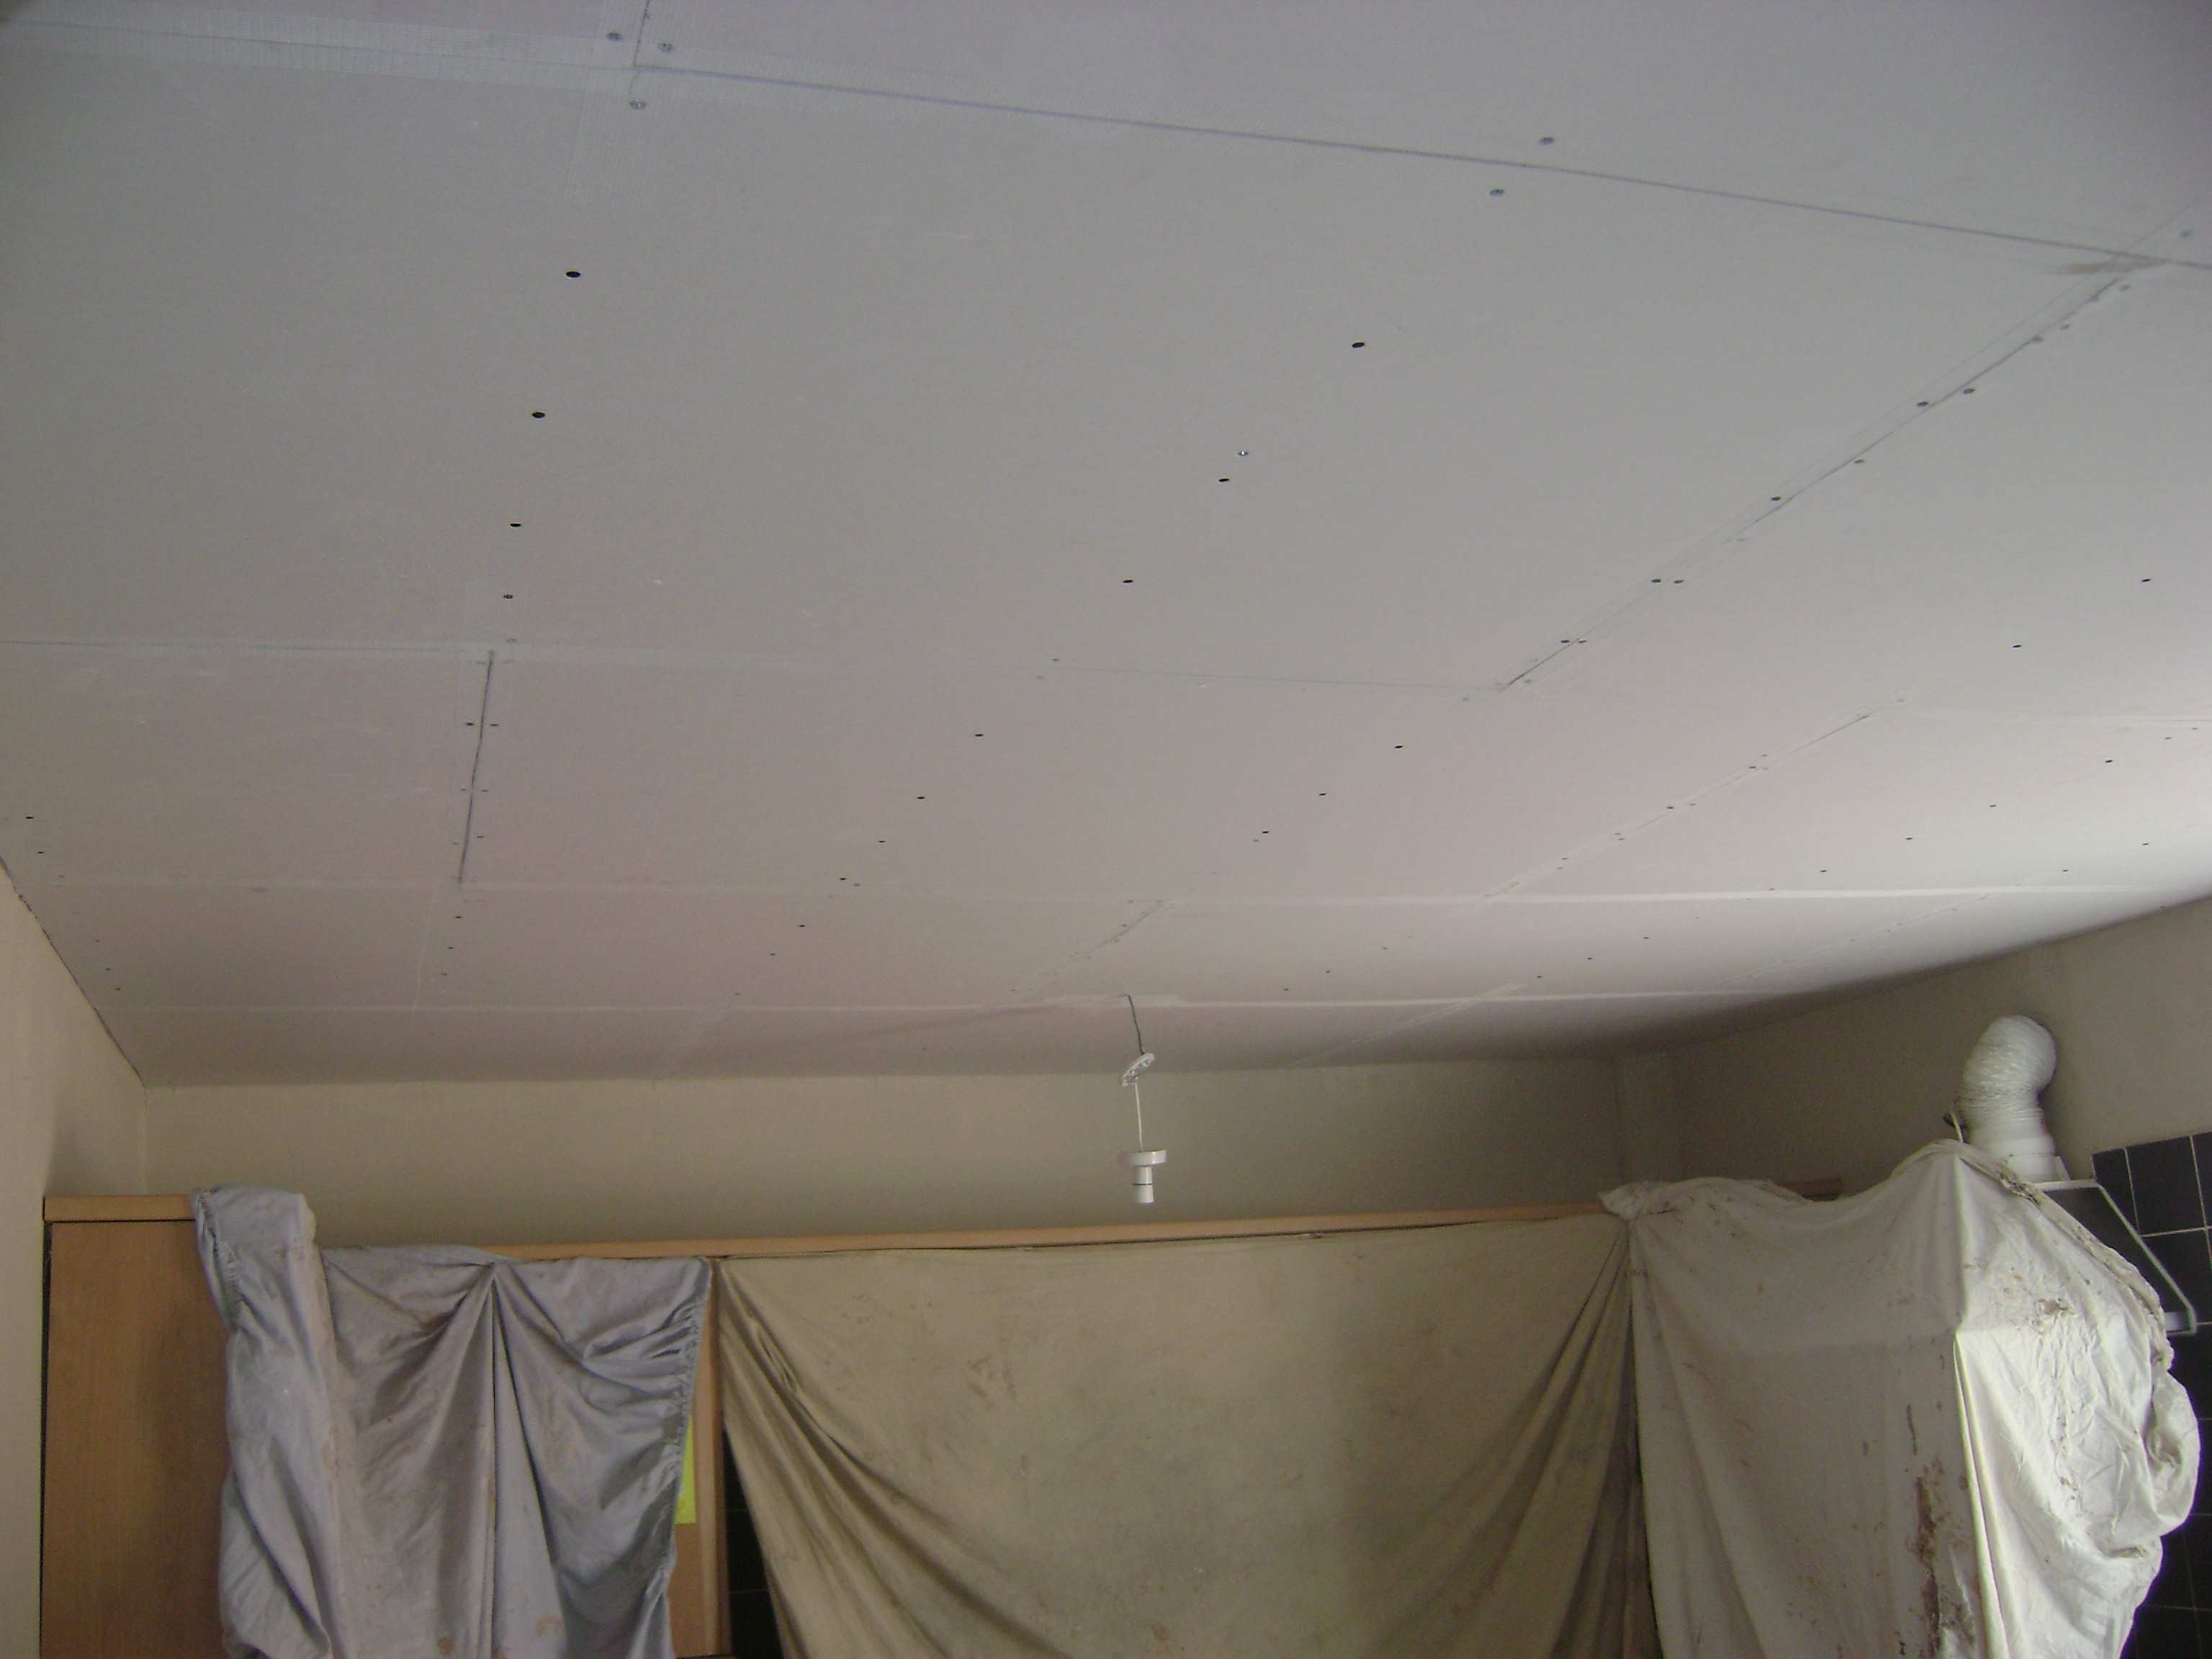 After scraping back the blown areas it became apparent the board was no good so the whole ceiling was overboarded